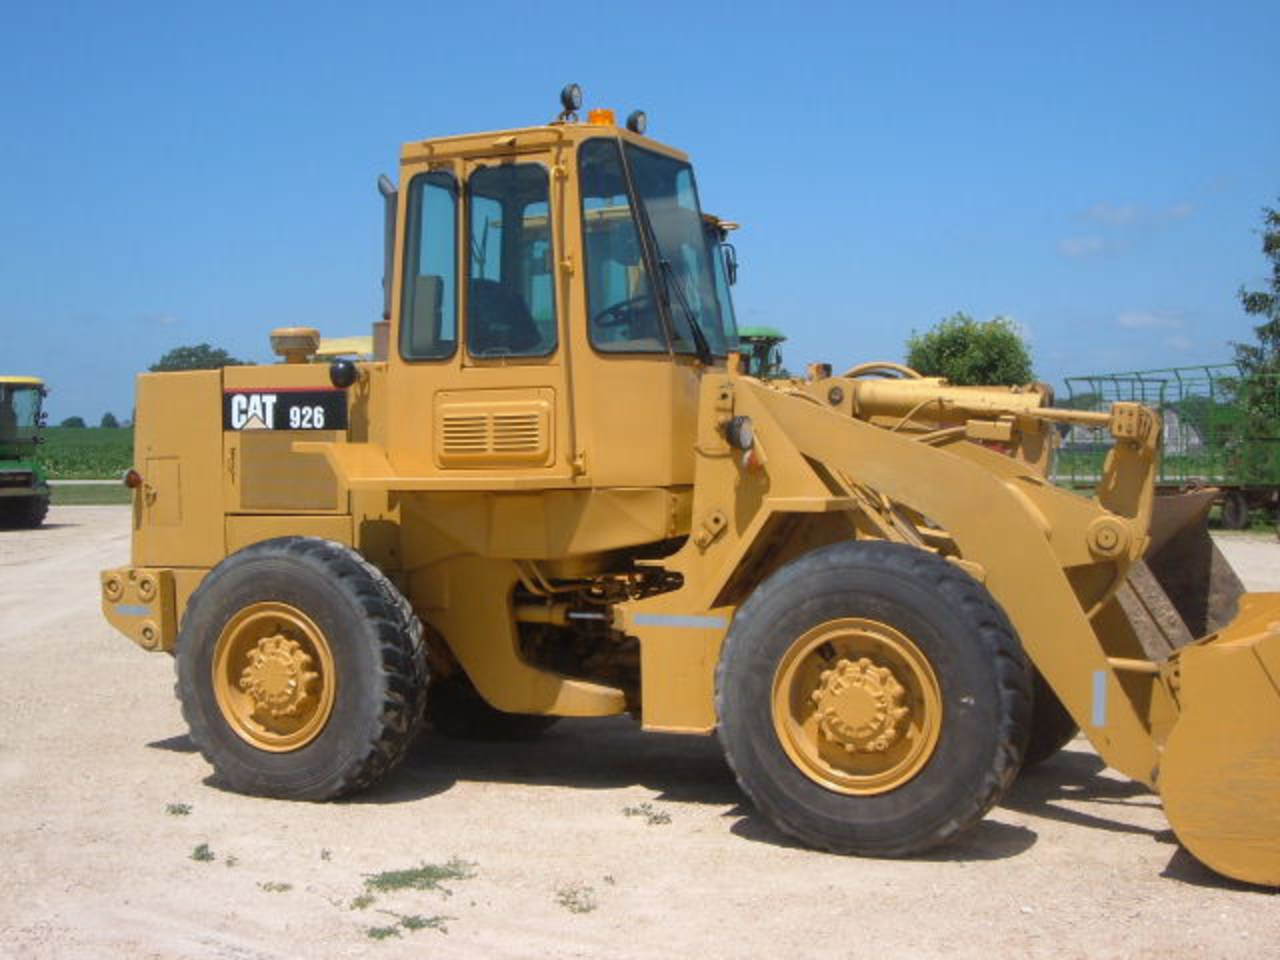 Caterpillar 926. Best photos and information of model.